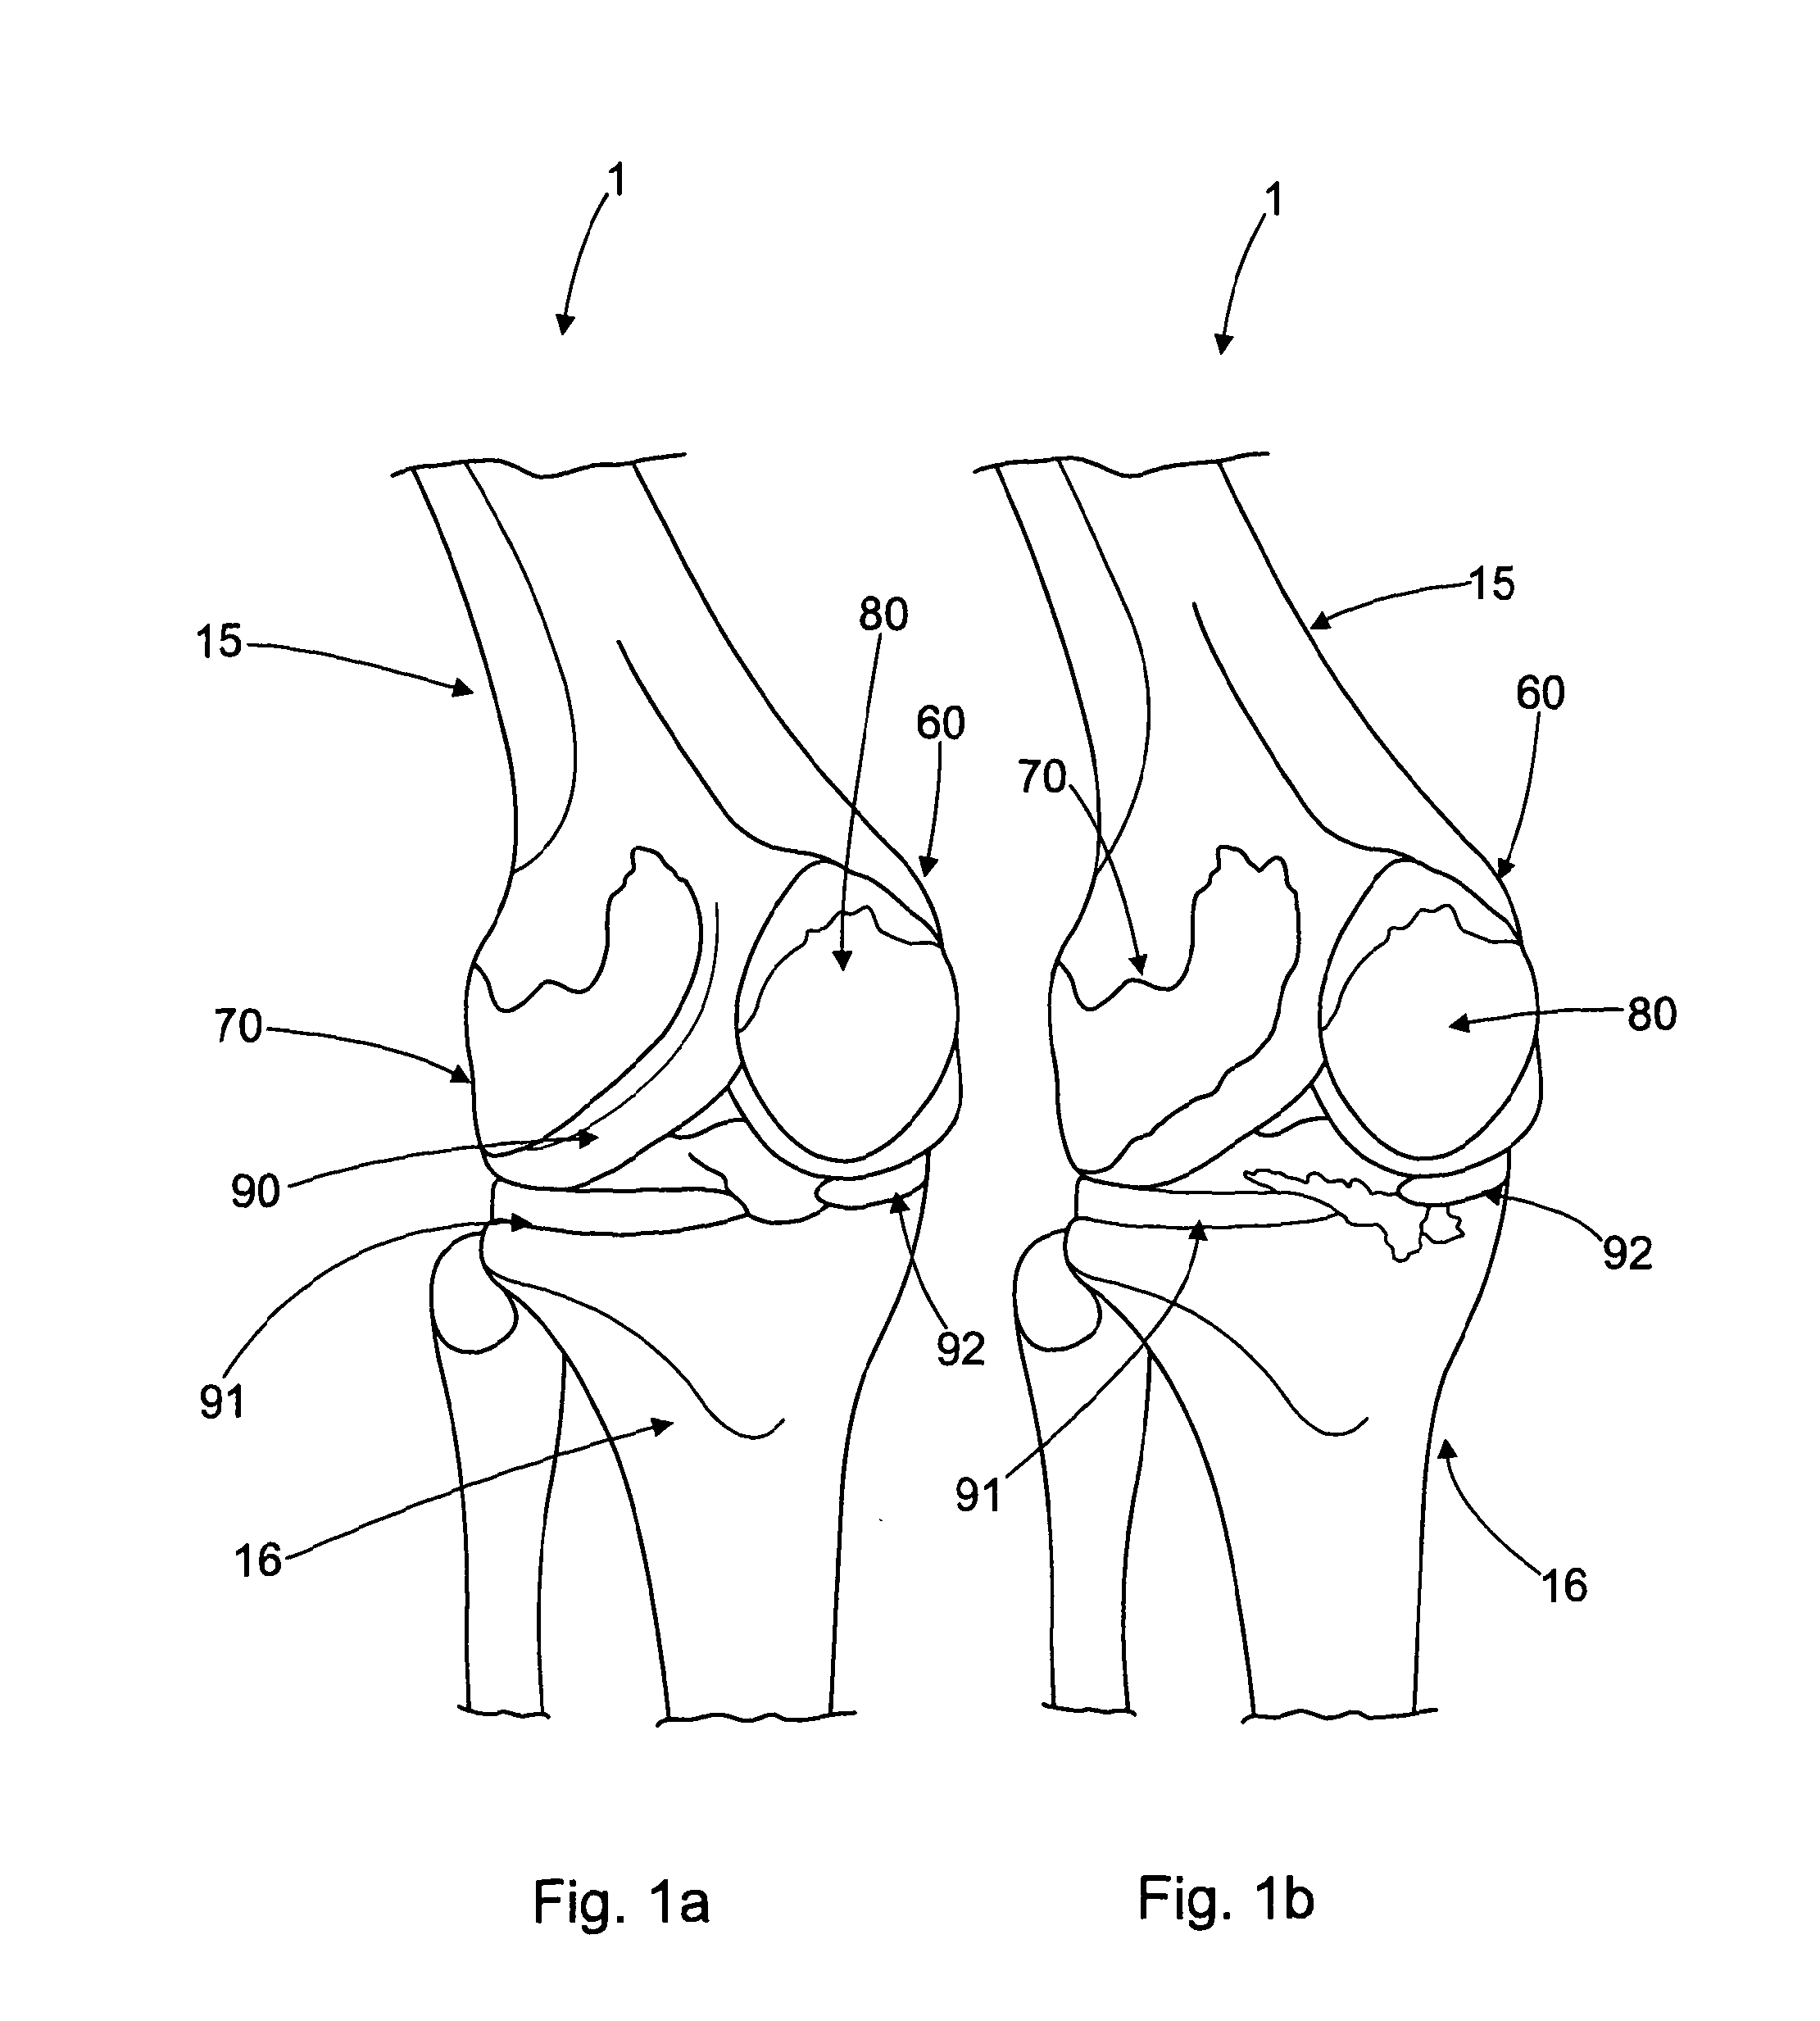 Tibial prosthetic component for a partial or unicondylar bearing knee replacement, method of selecting such a tibial prosthetic component, method of implanting such a tibial prosthetic component and a kit for a surgeon